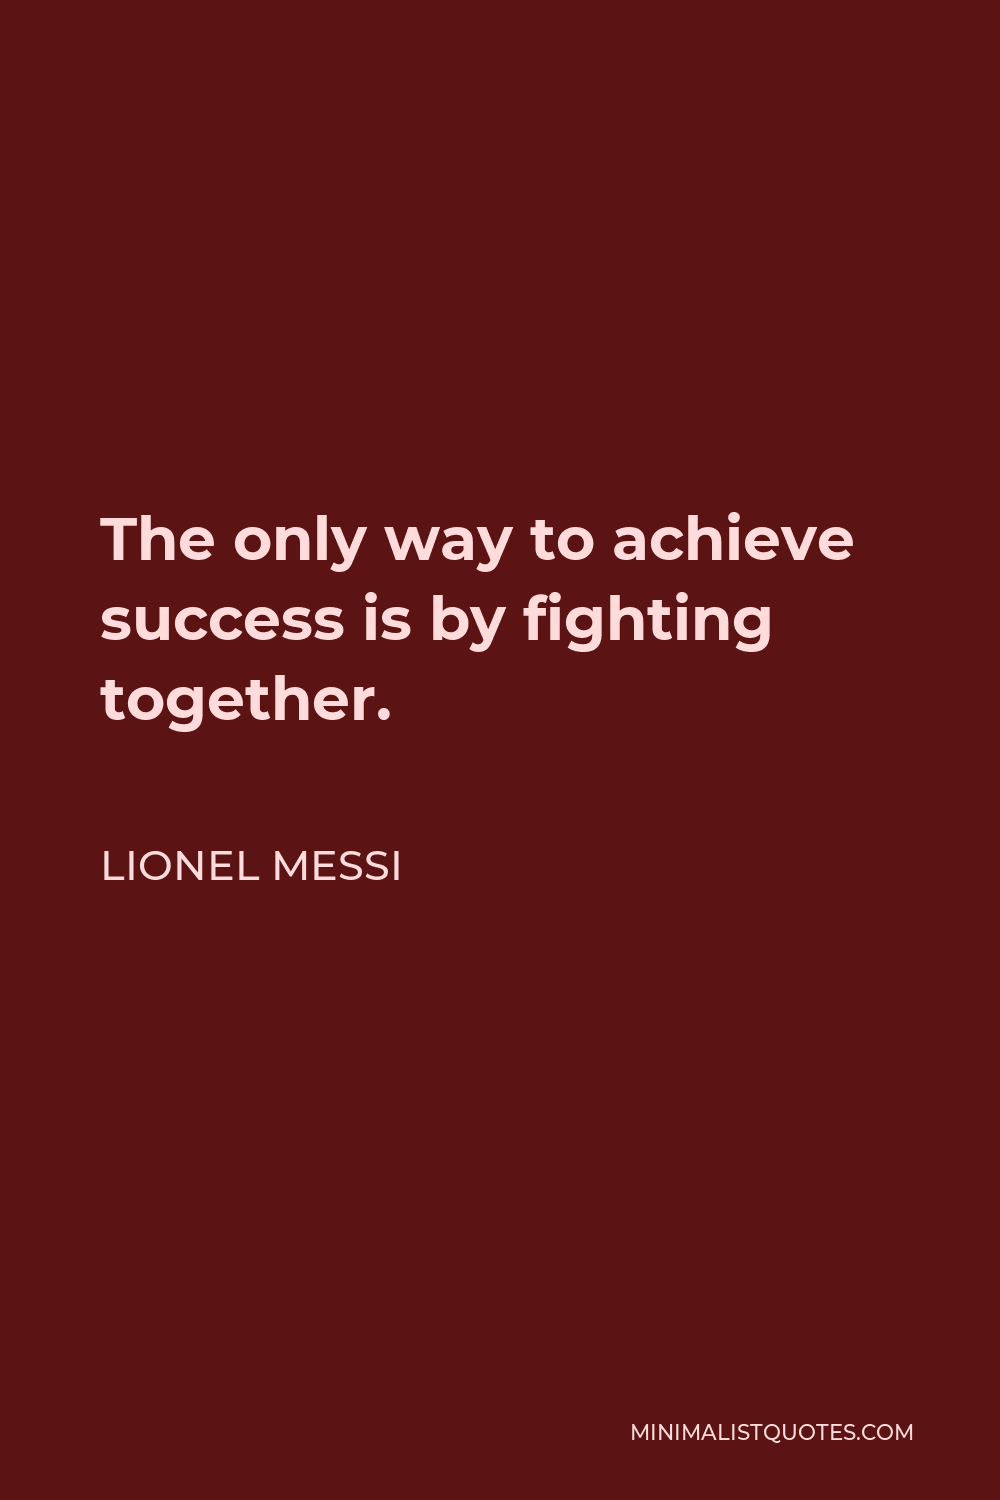 Lionel Messi Quote - The only way to achieve success is by fighting together.